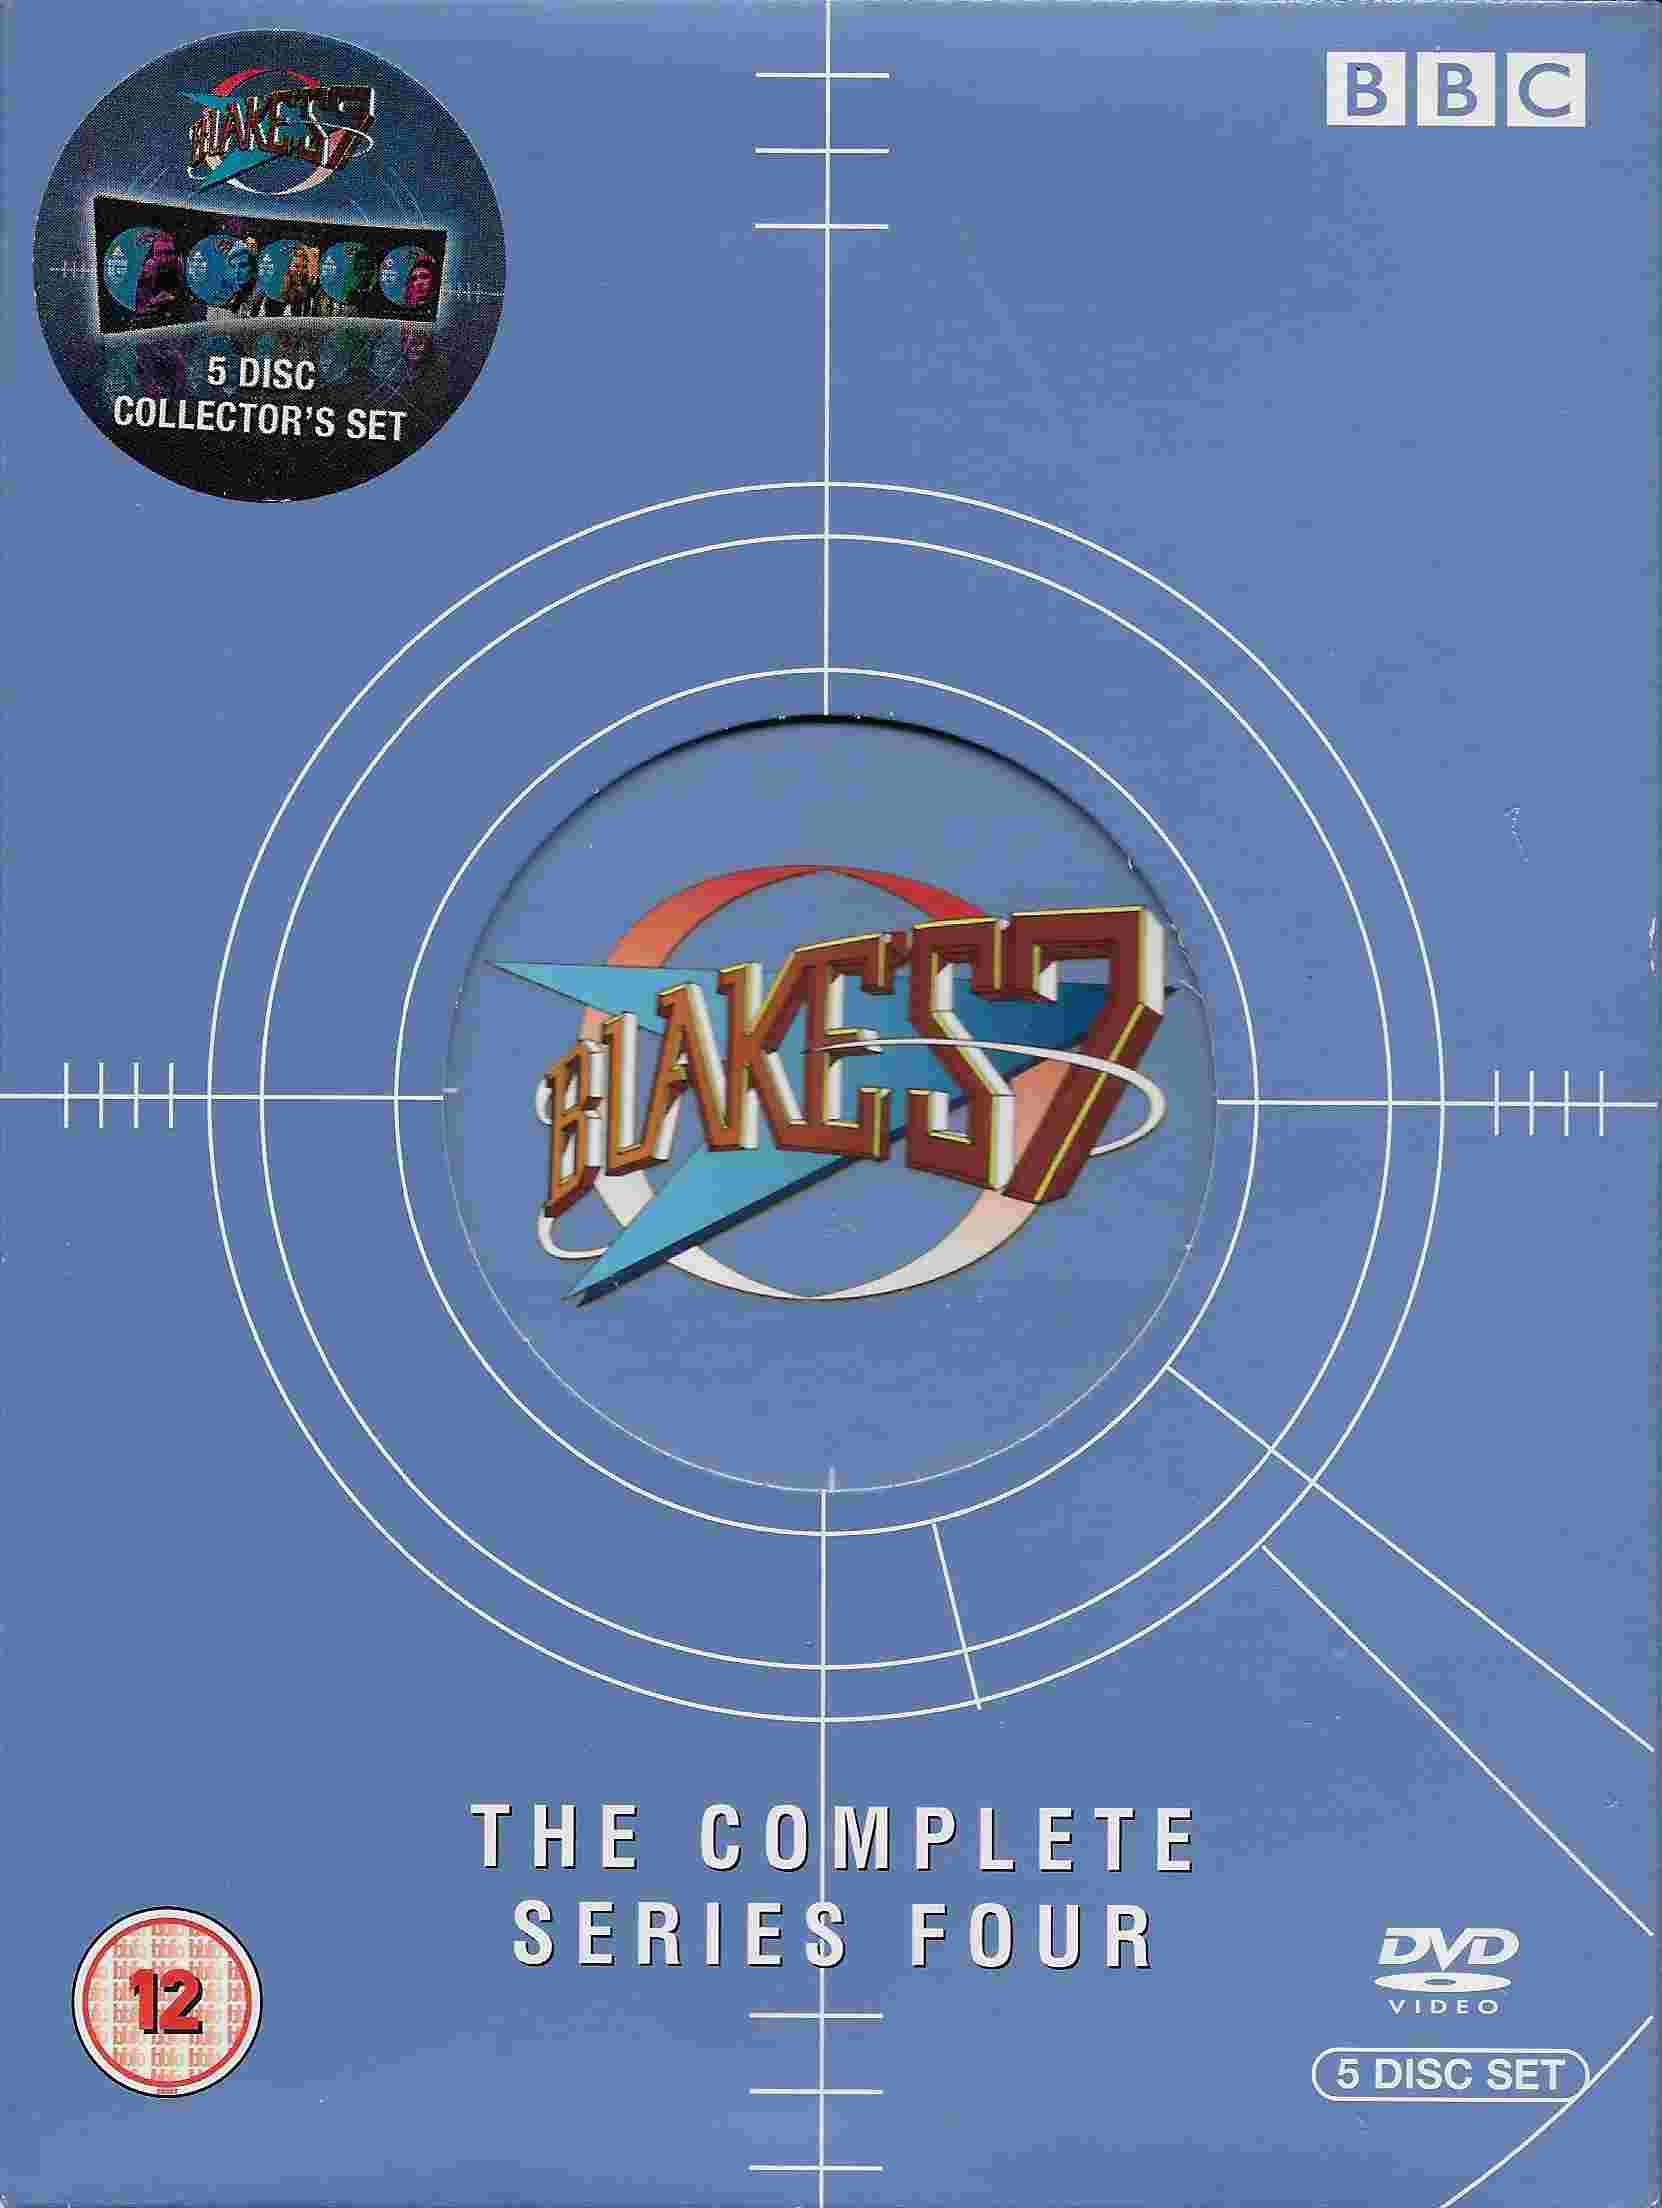 Picture of BBCDVD 1186 Blake's 7 - Series 4 by artist Chris Boucher / Ben Steed / Robert Holmes / James Follett / Allan Prior / Roger Parkes / Rod Beacham / Bill Lyons / Tanith Lee / Colin Davis / Simon Masters from the BBC records and Tapes library